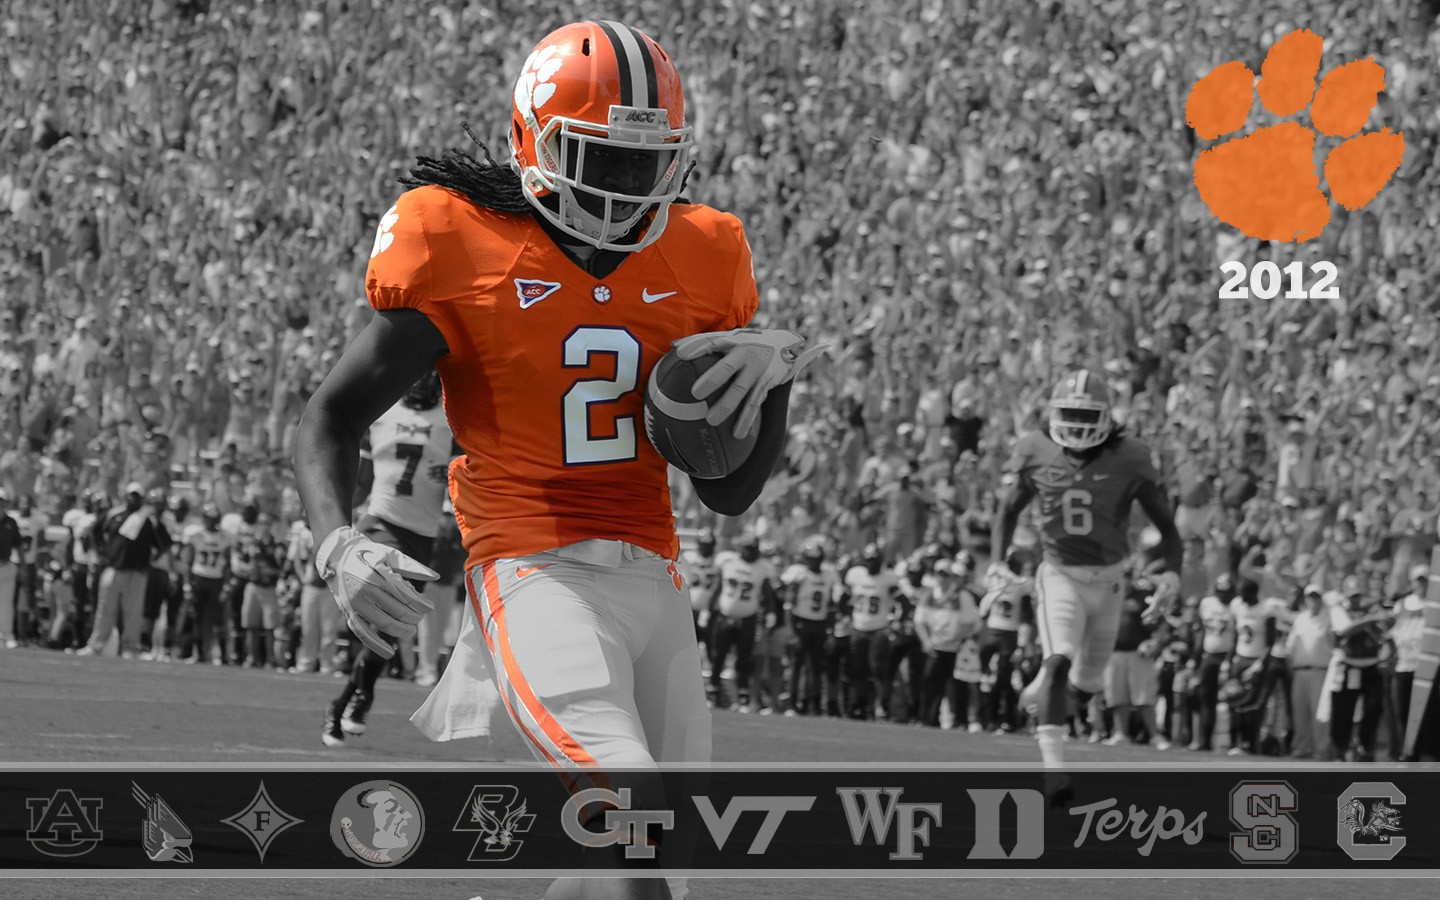 Do You Like Schedule Desktop Wallpaper Here Are Some For Clemson